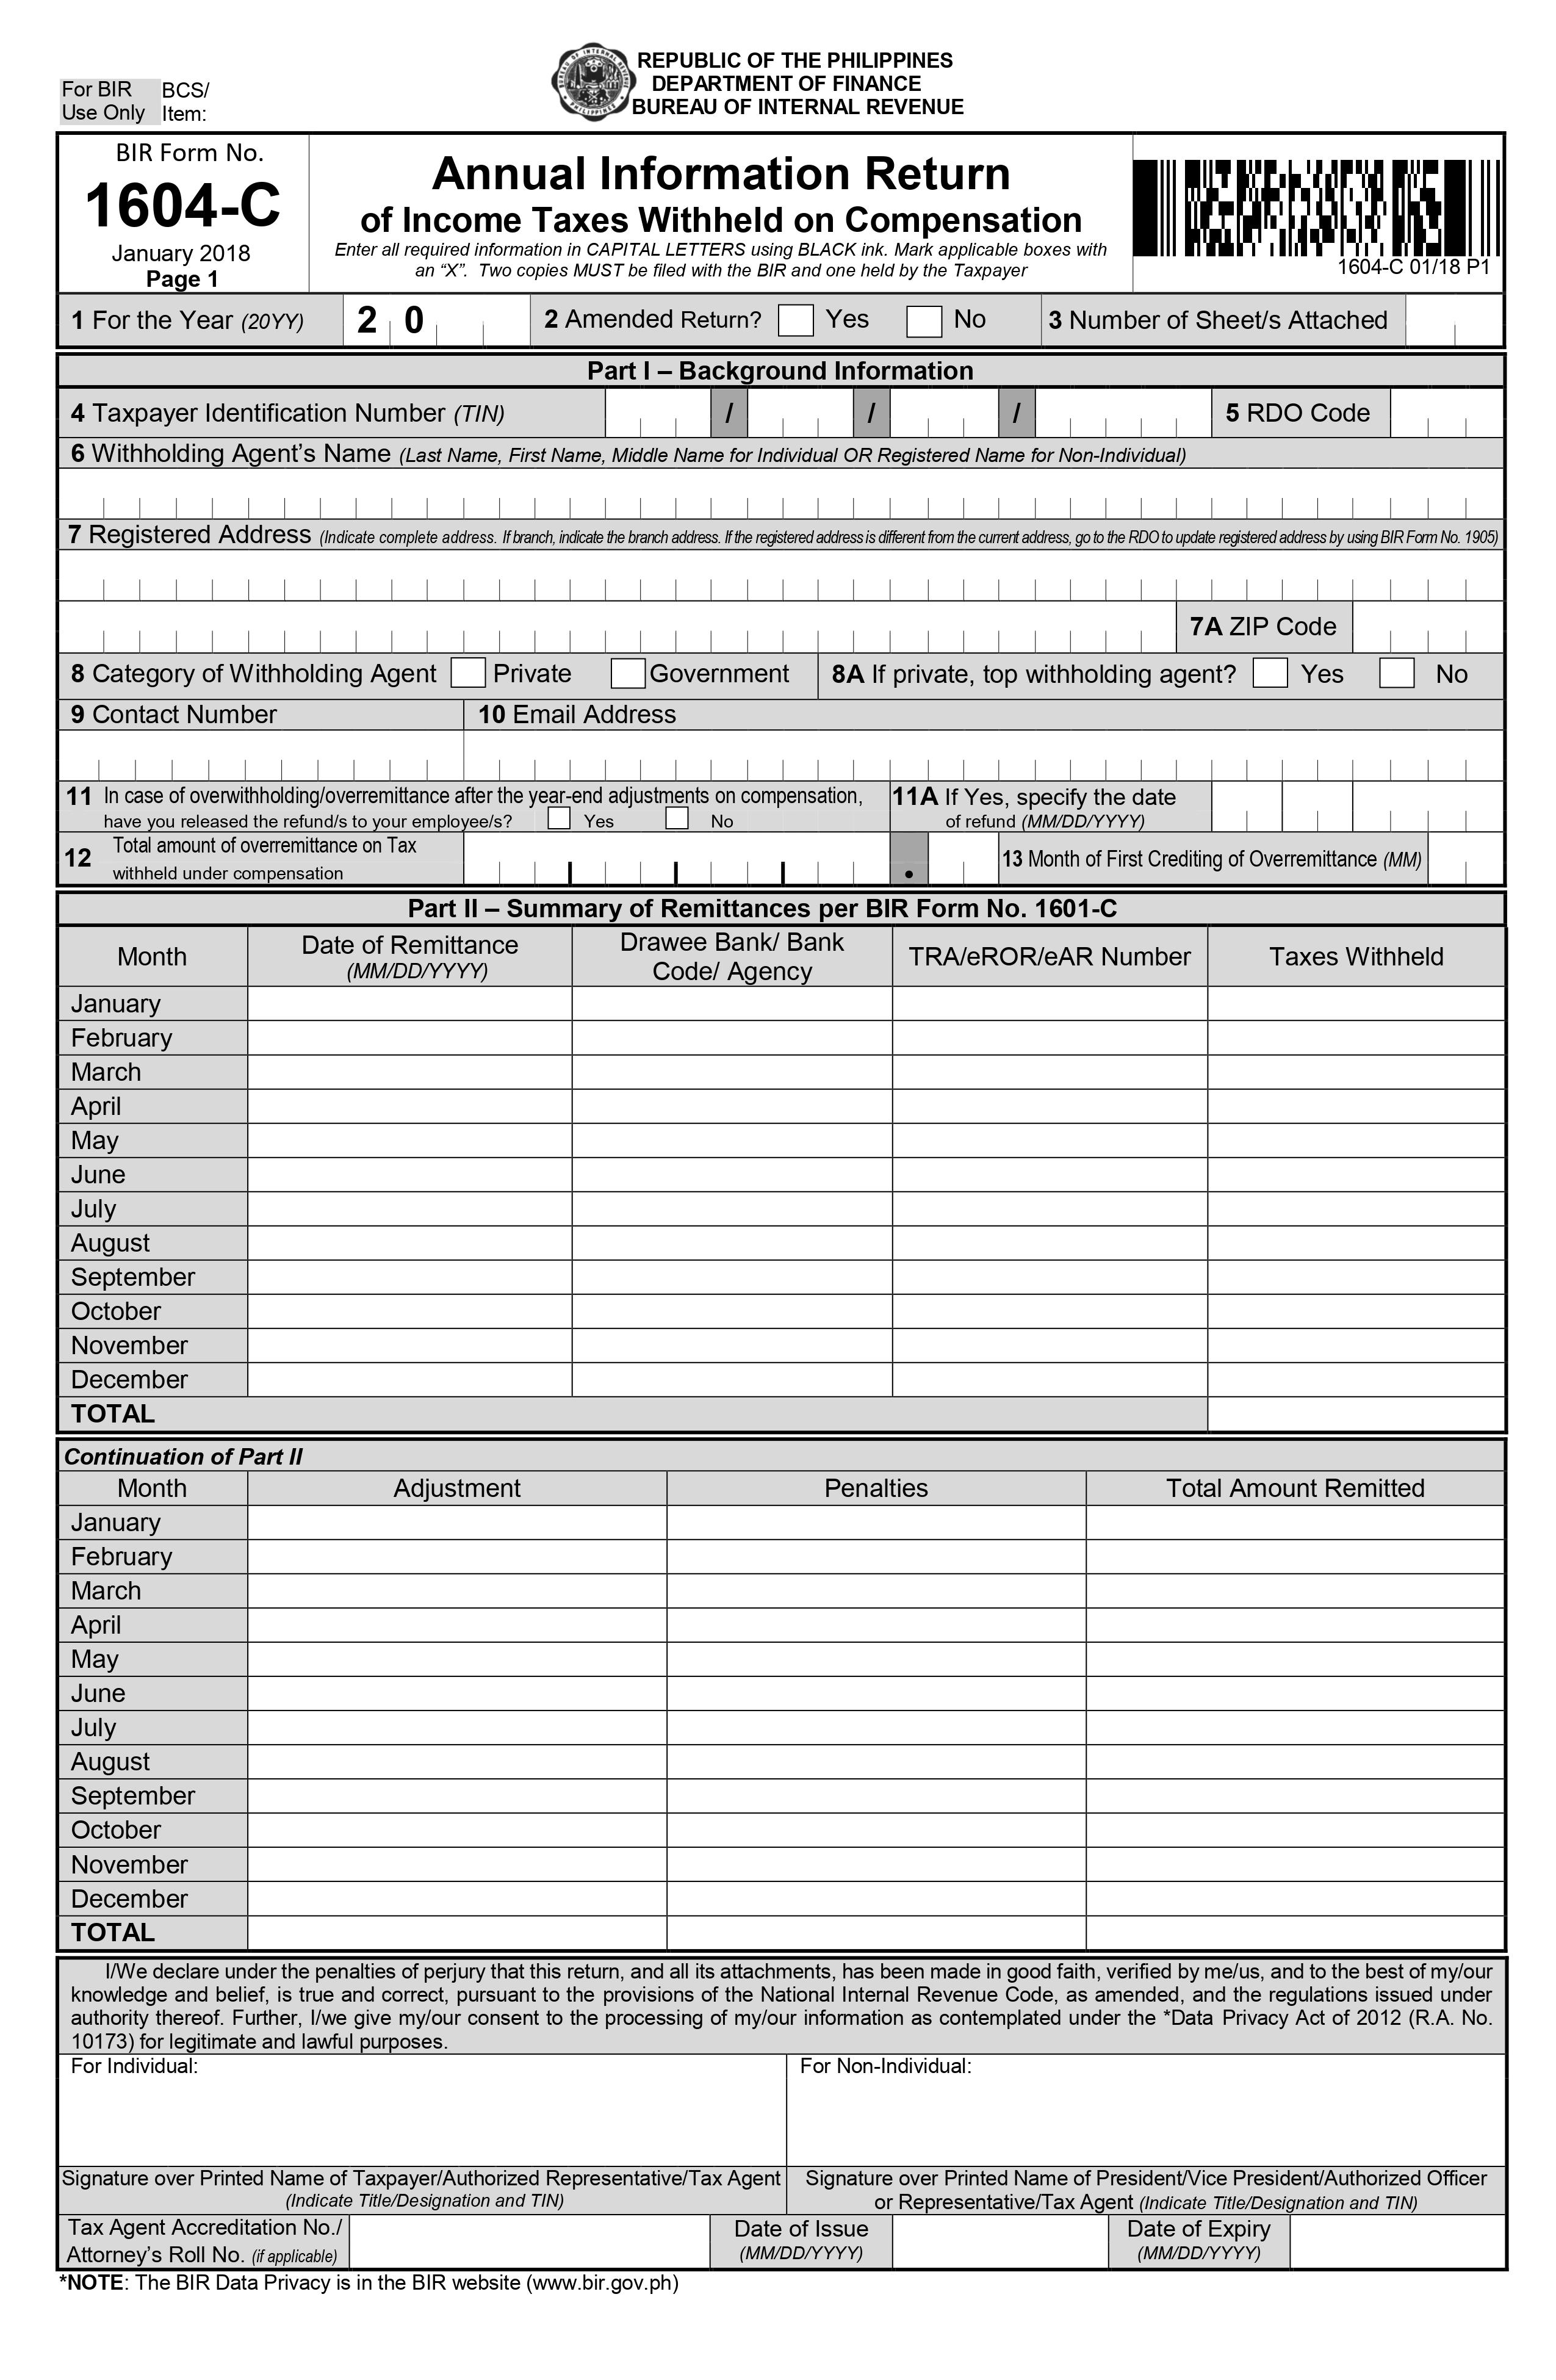 Annual Information Return of Income Taxes Withheld on Compensation BIR Form 1604C